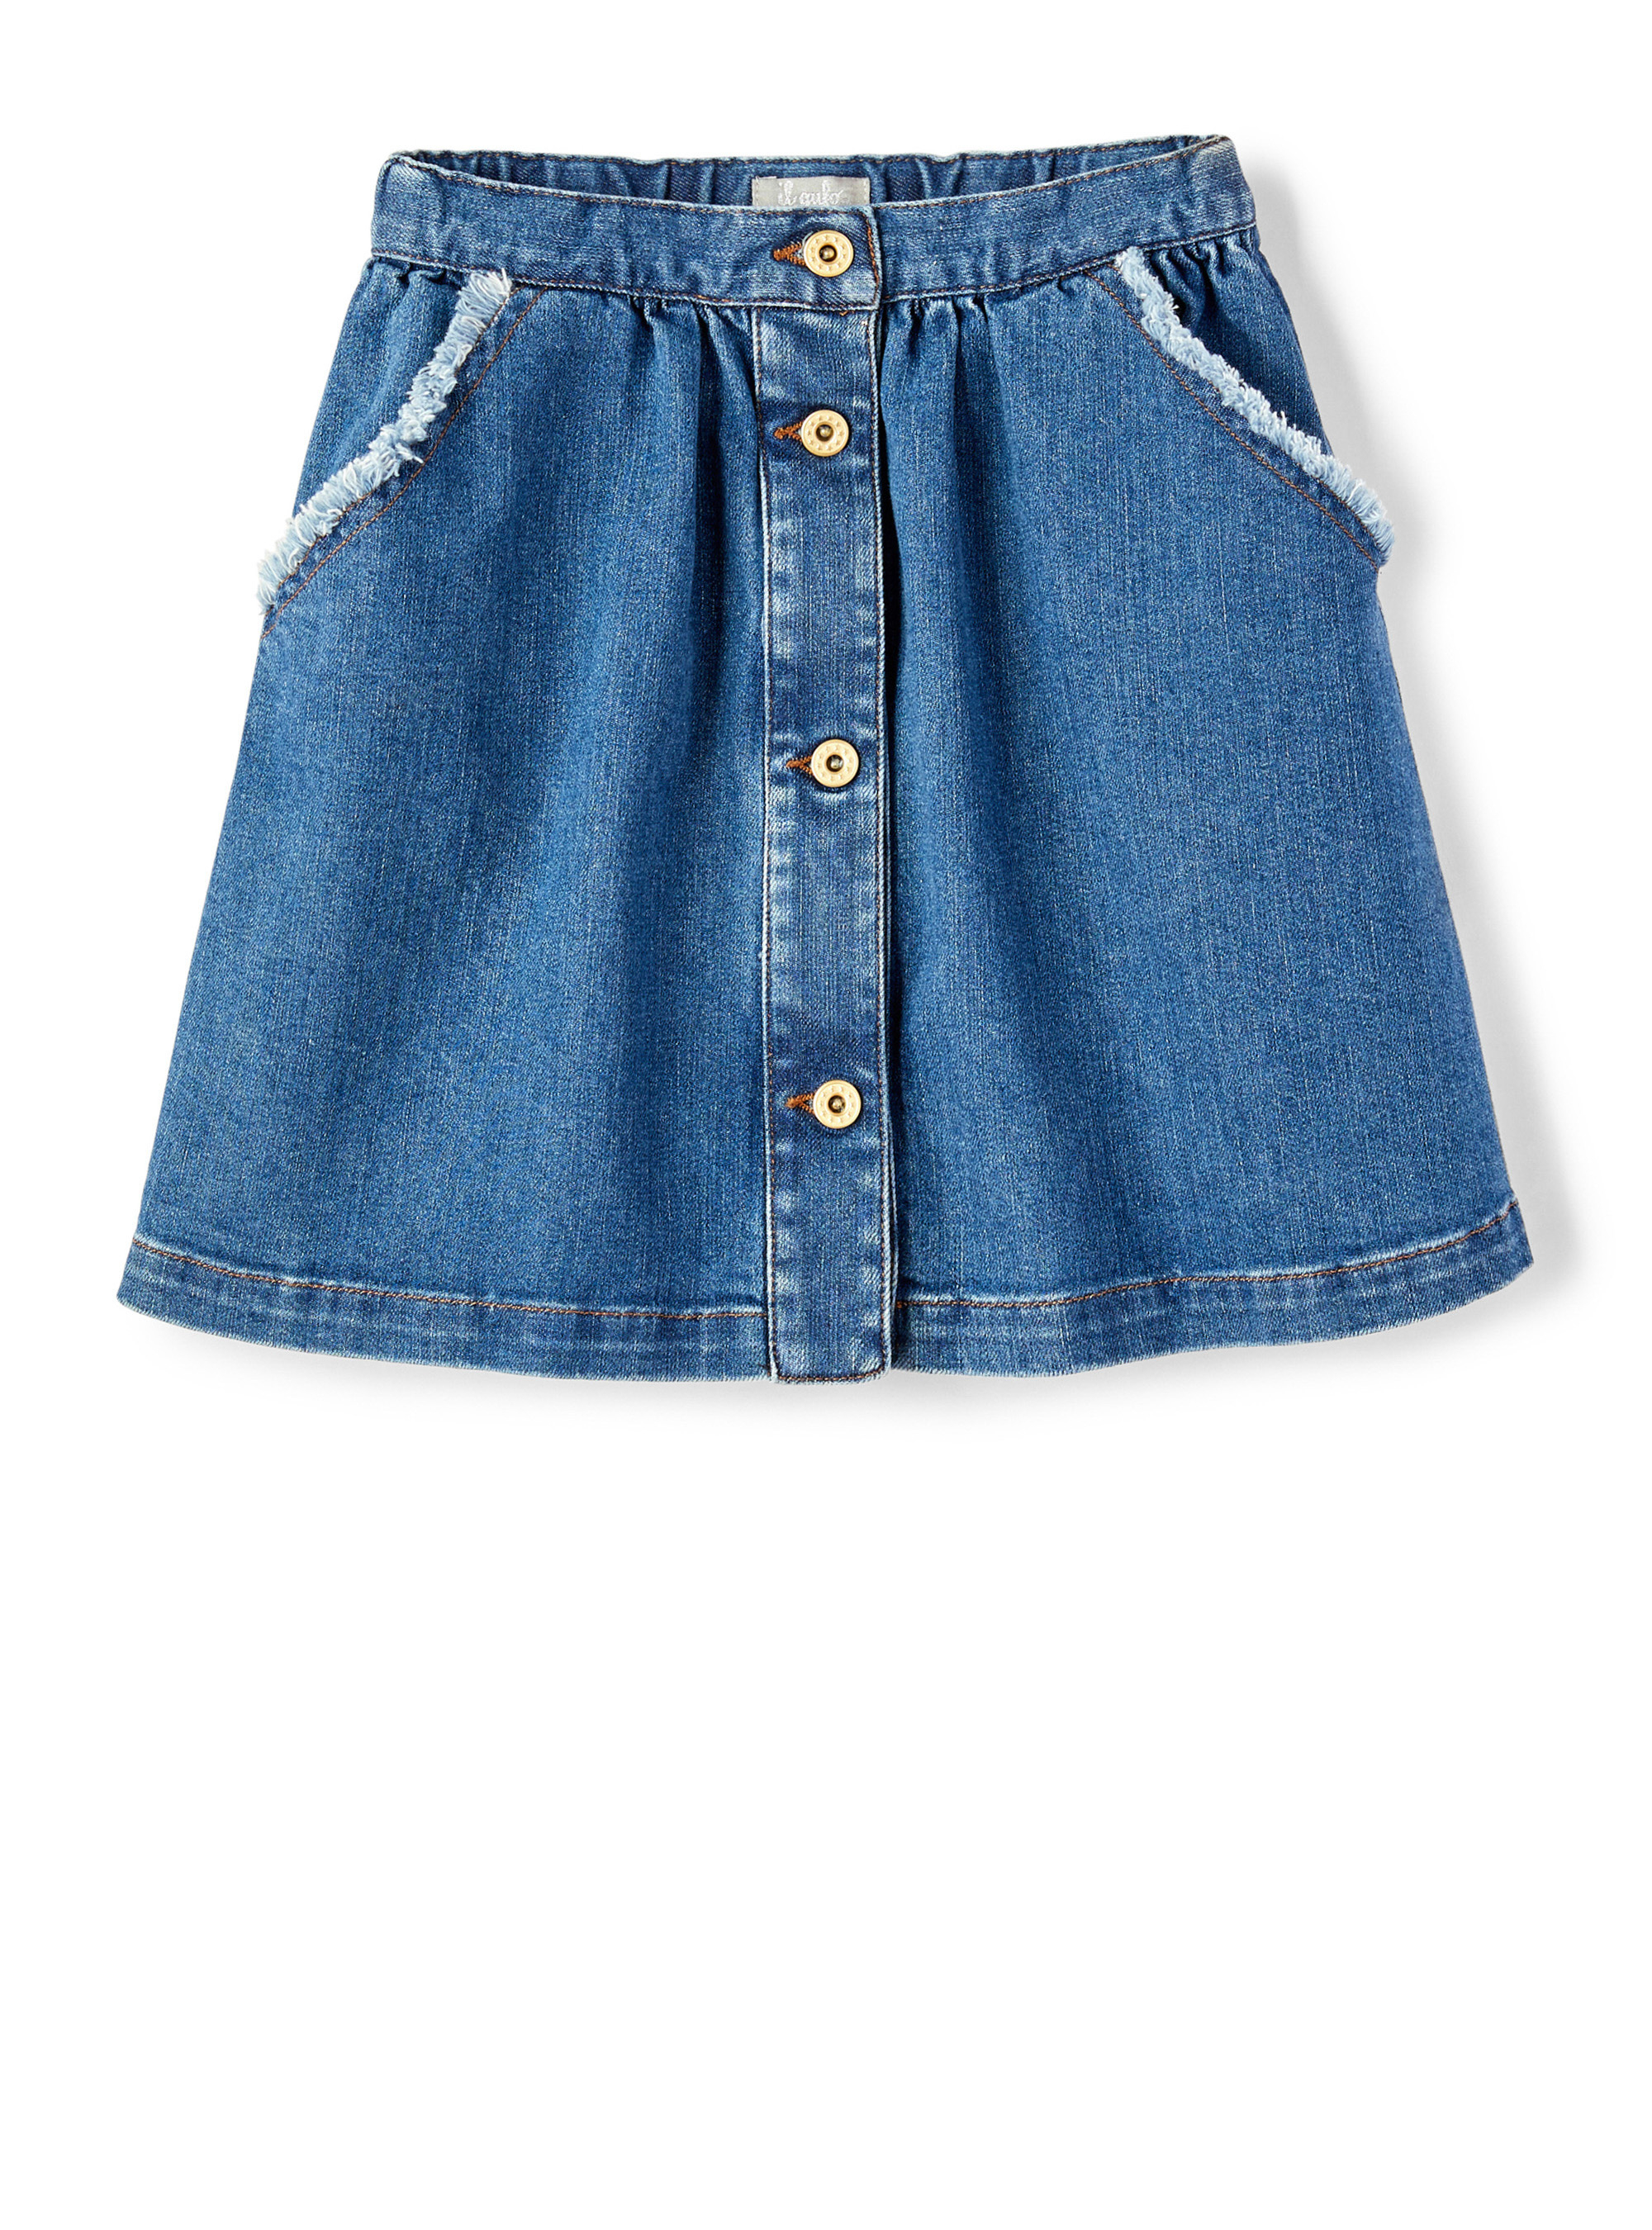 Blue denim skirt with buttons - Skirts - Il Gufo